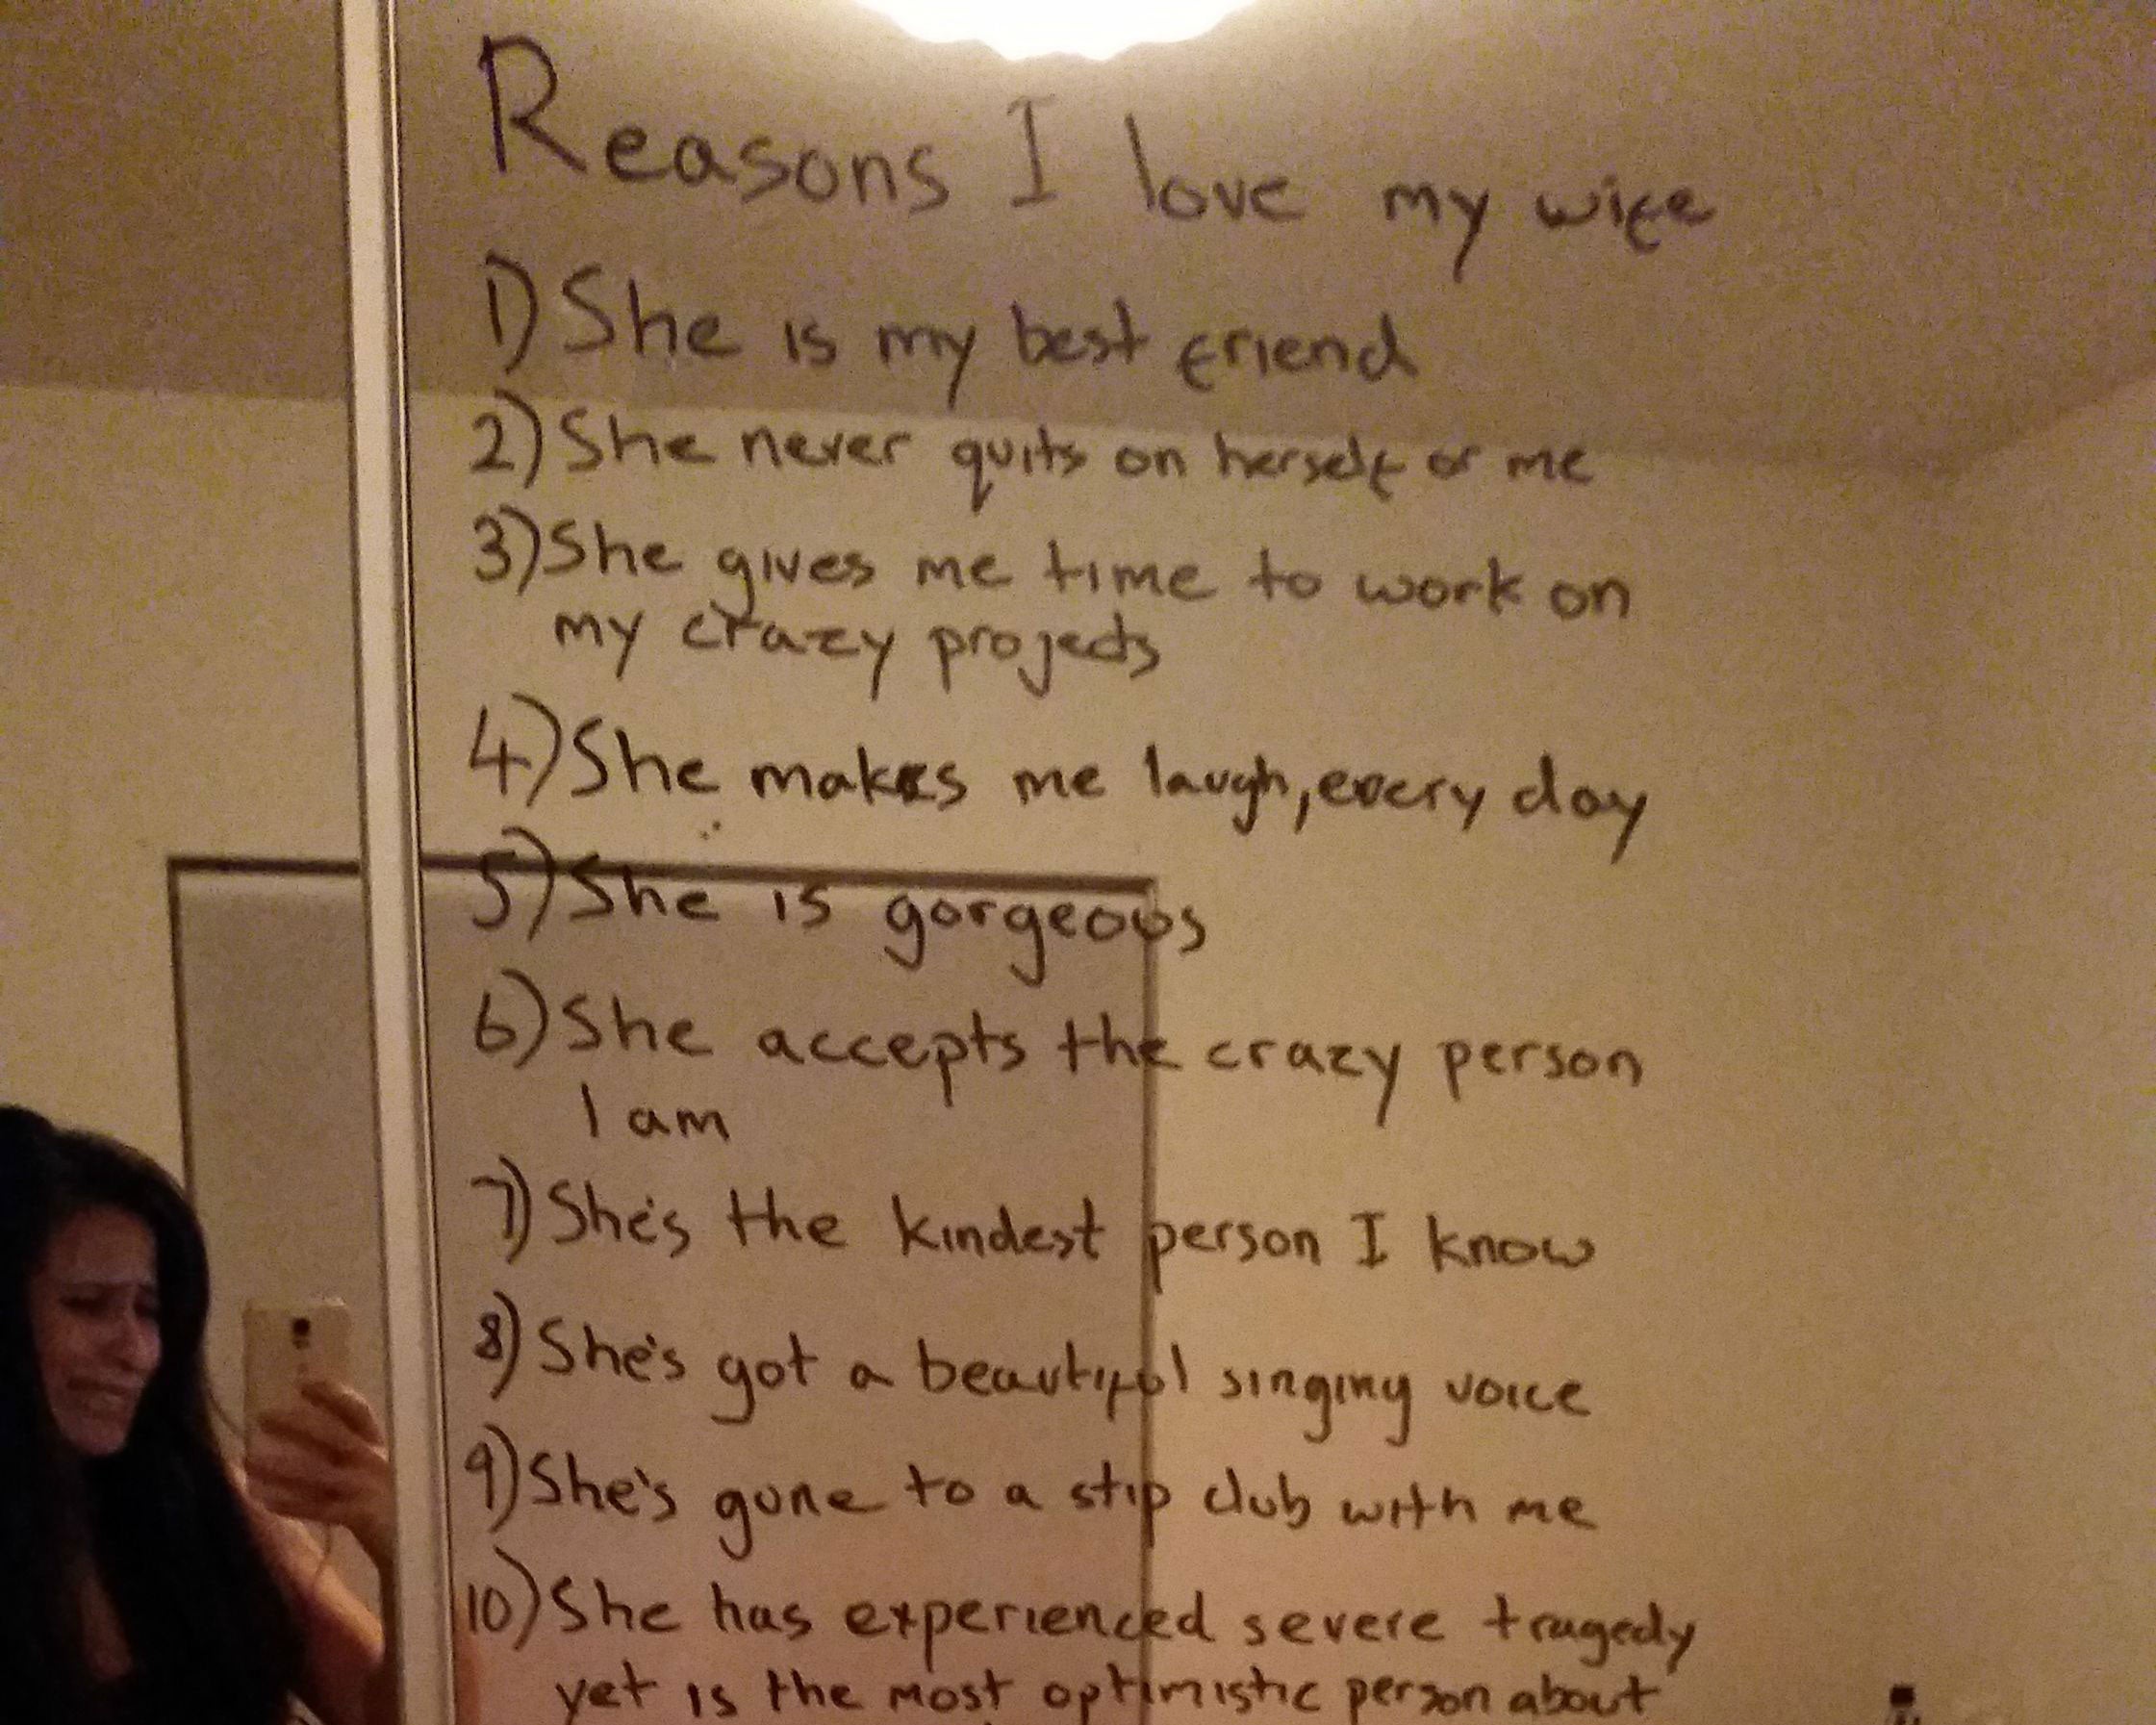 Molly Murphy's image of the list her husband wrote titled 'Reasons I love my wife'